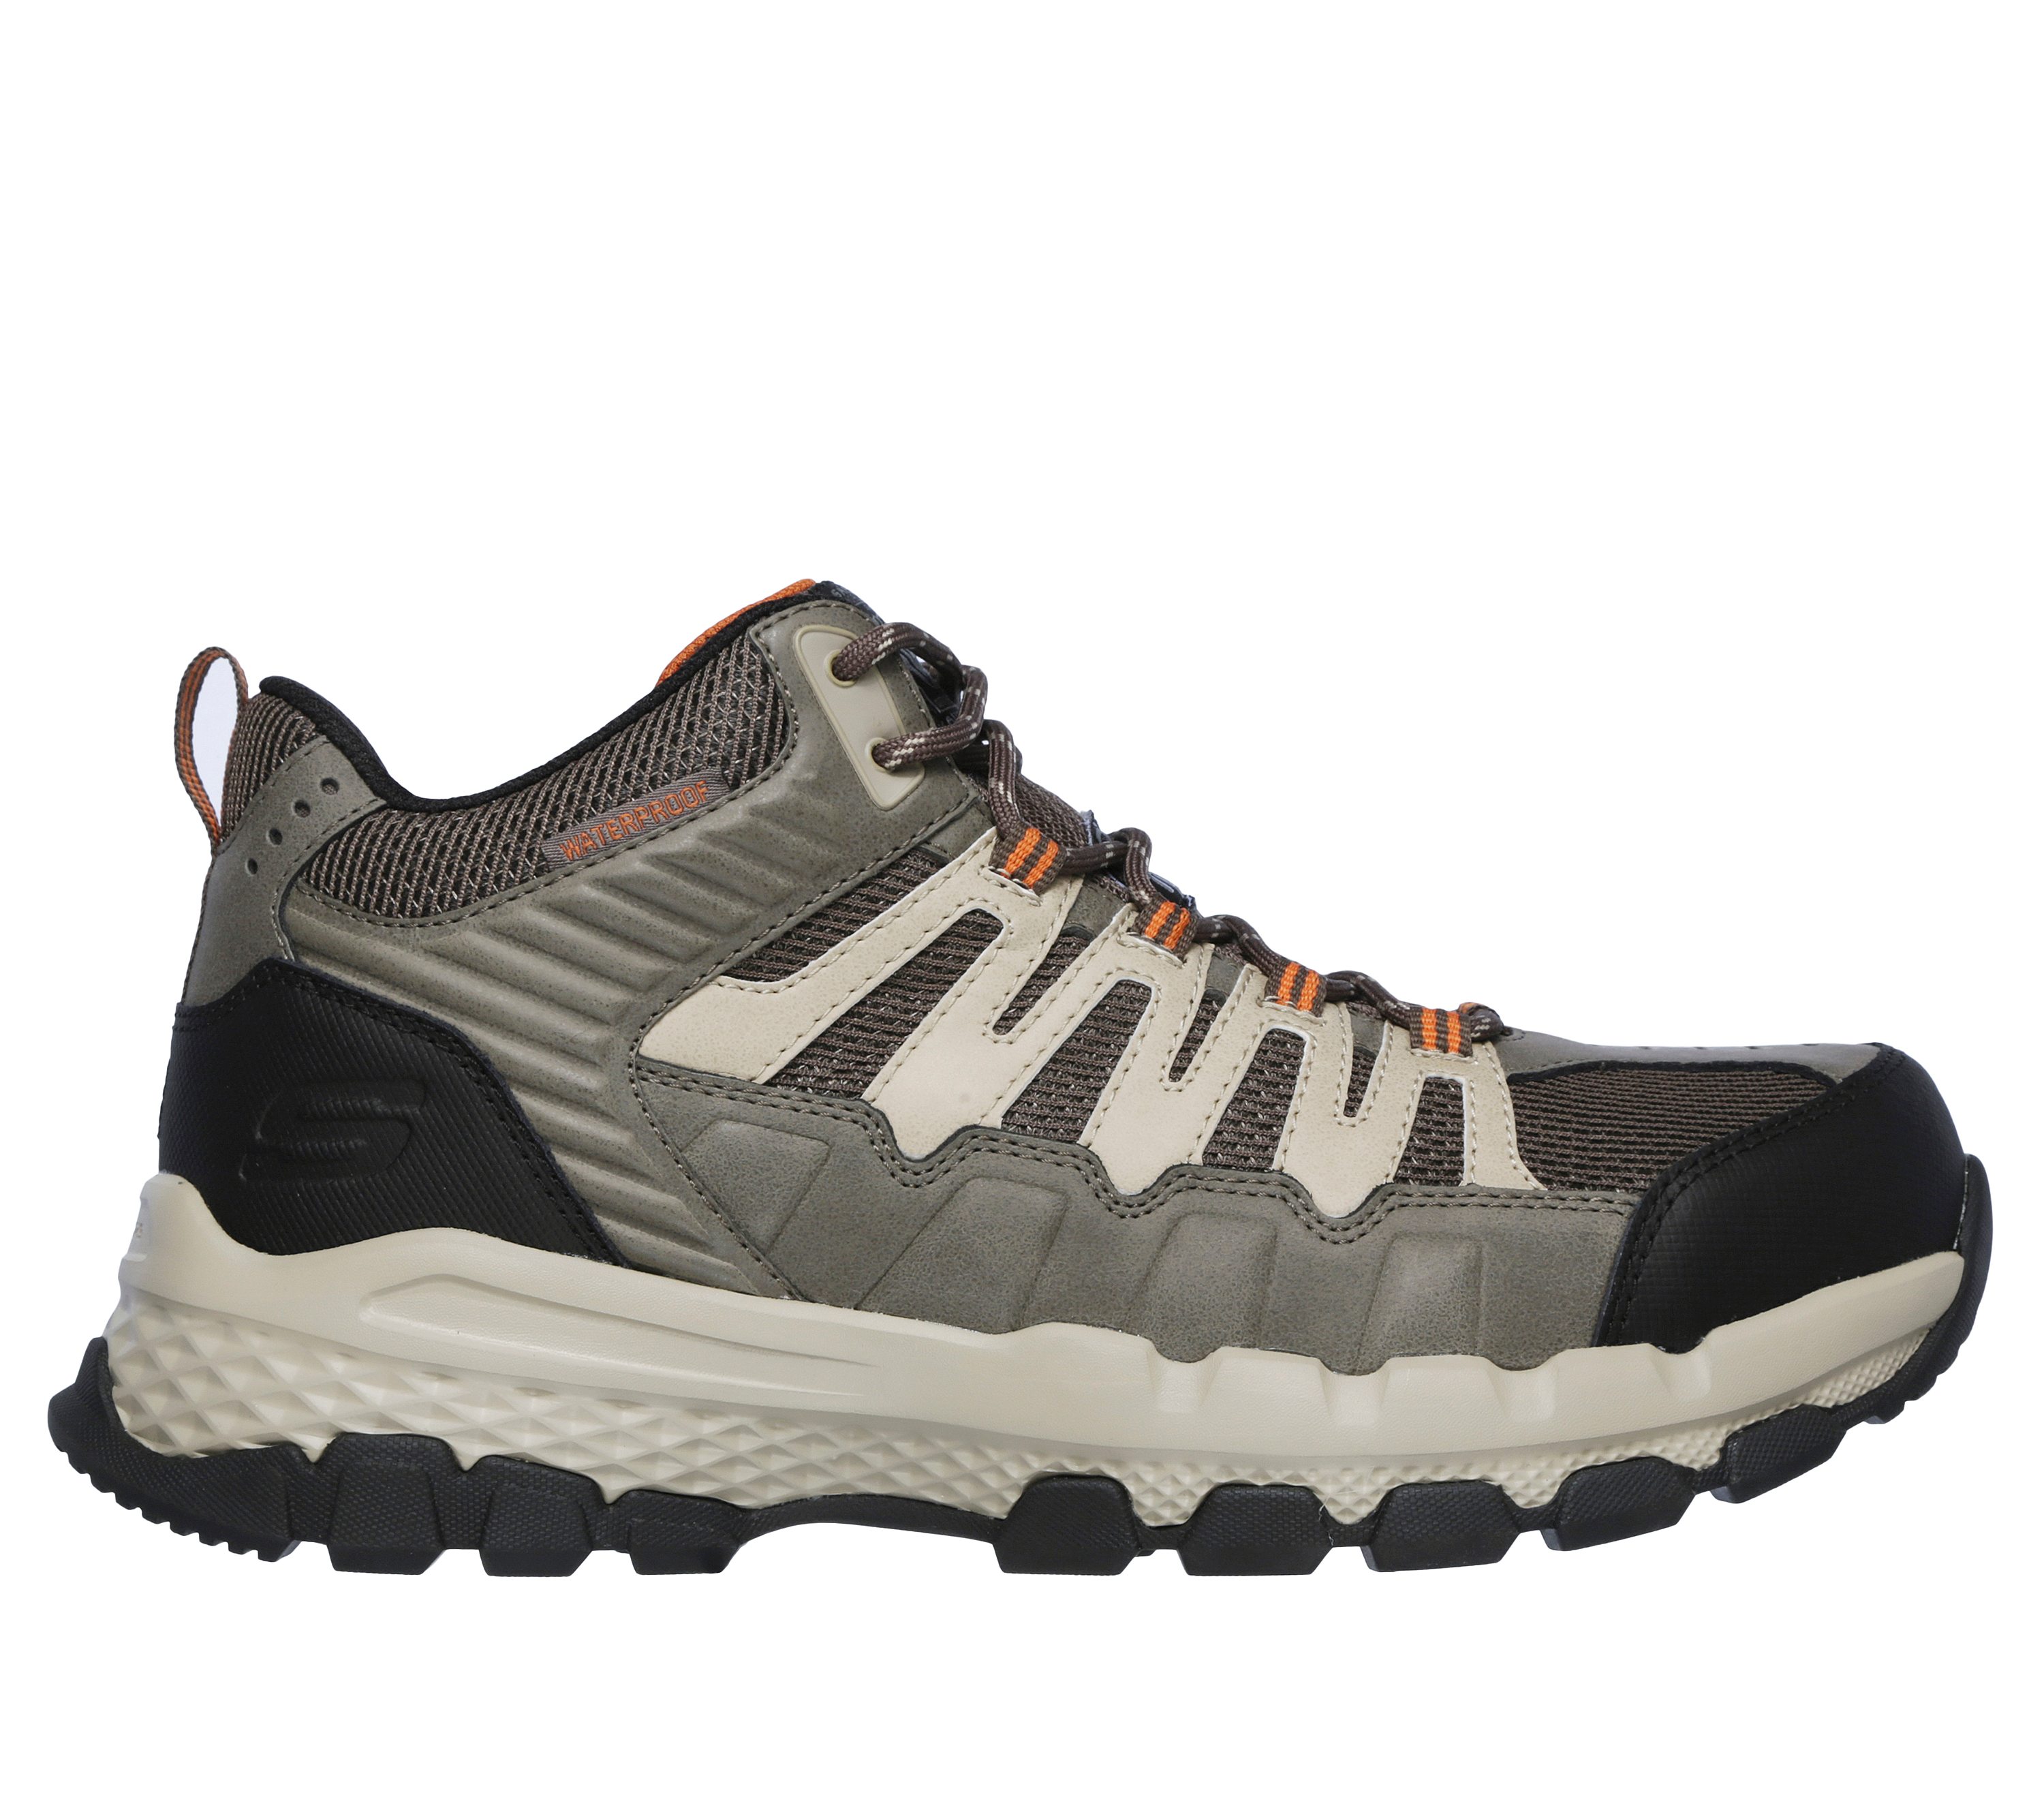 skechers safety shoes india